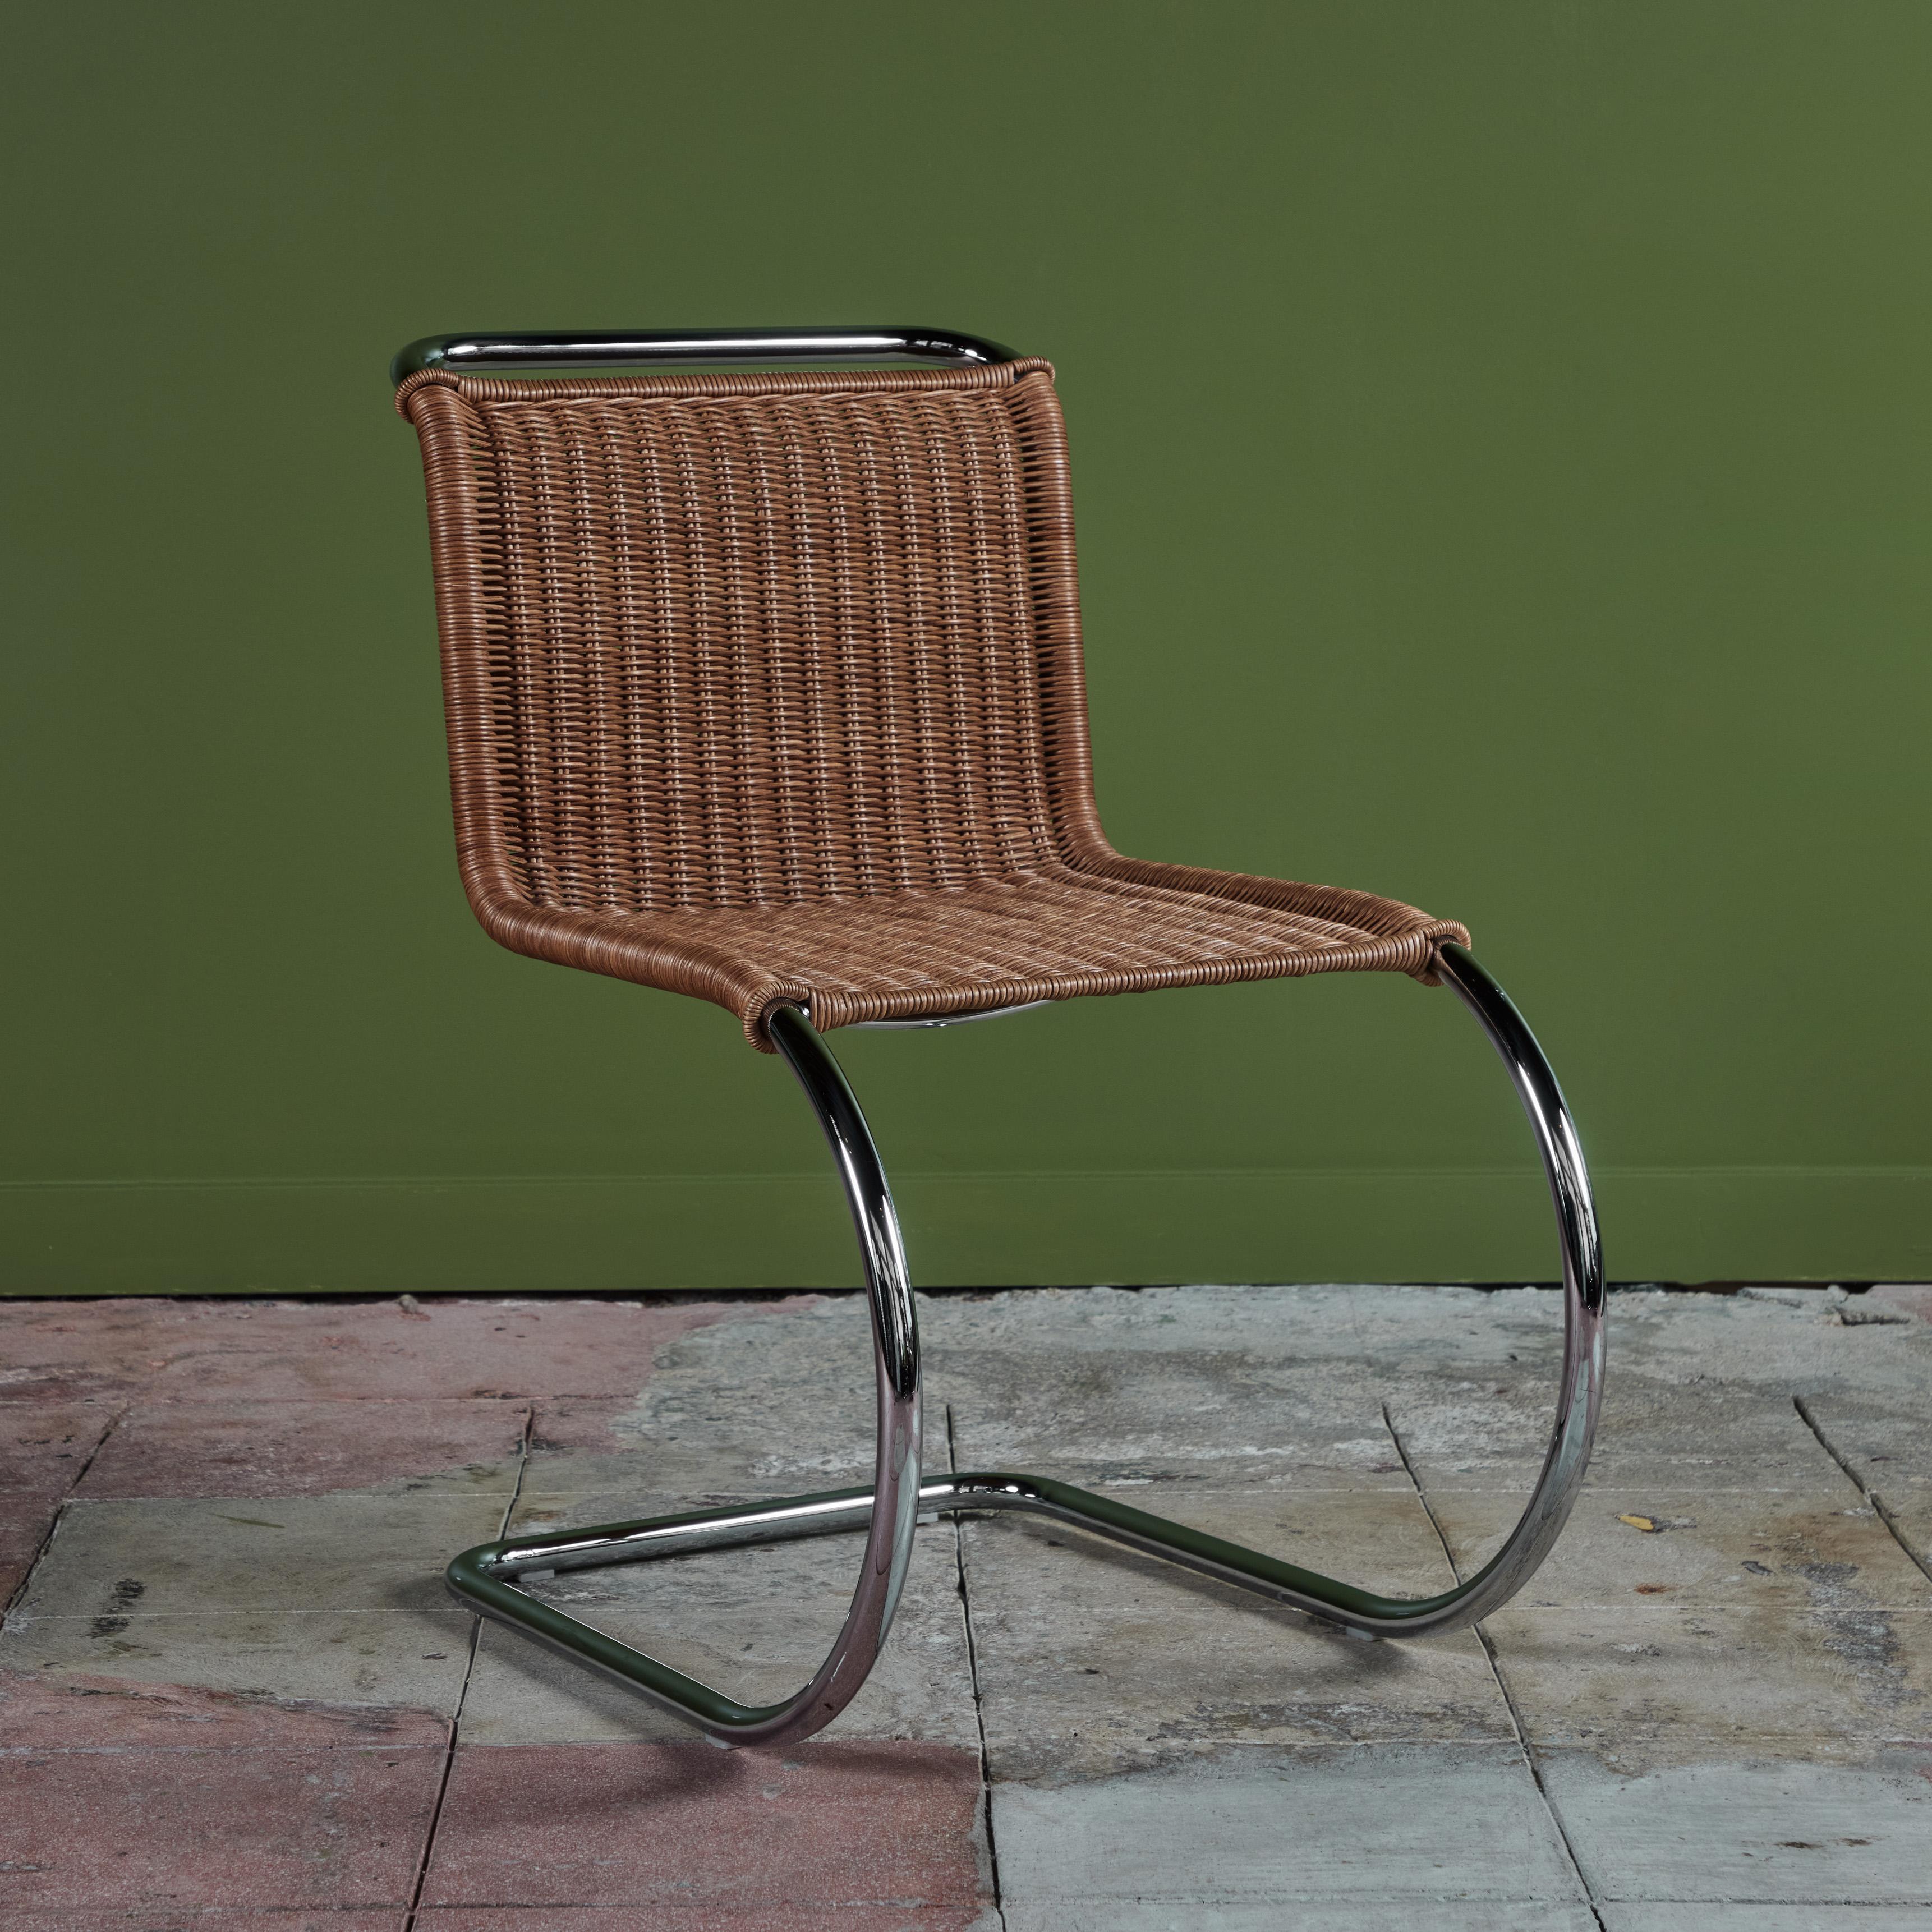 Cantilevered dining chair by Mies van der Rohe for Knoll, c.2015. The chair features a tubular chrome plated steel frame with handwoven cane seat and backrest. 
Five available - each chair retains their original Knoll International